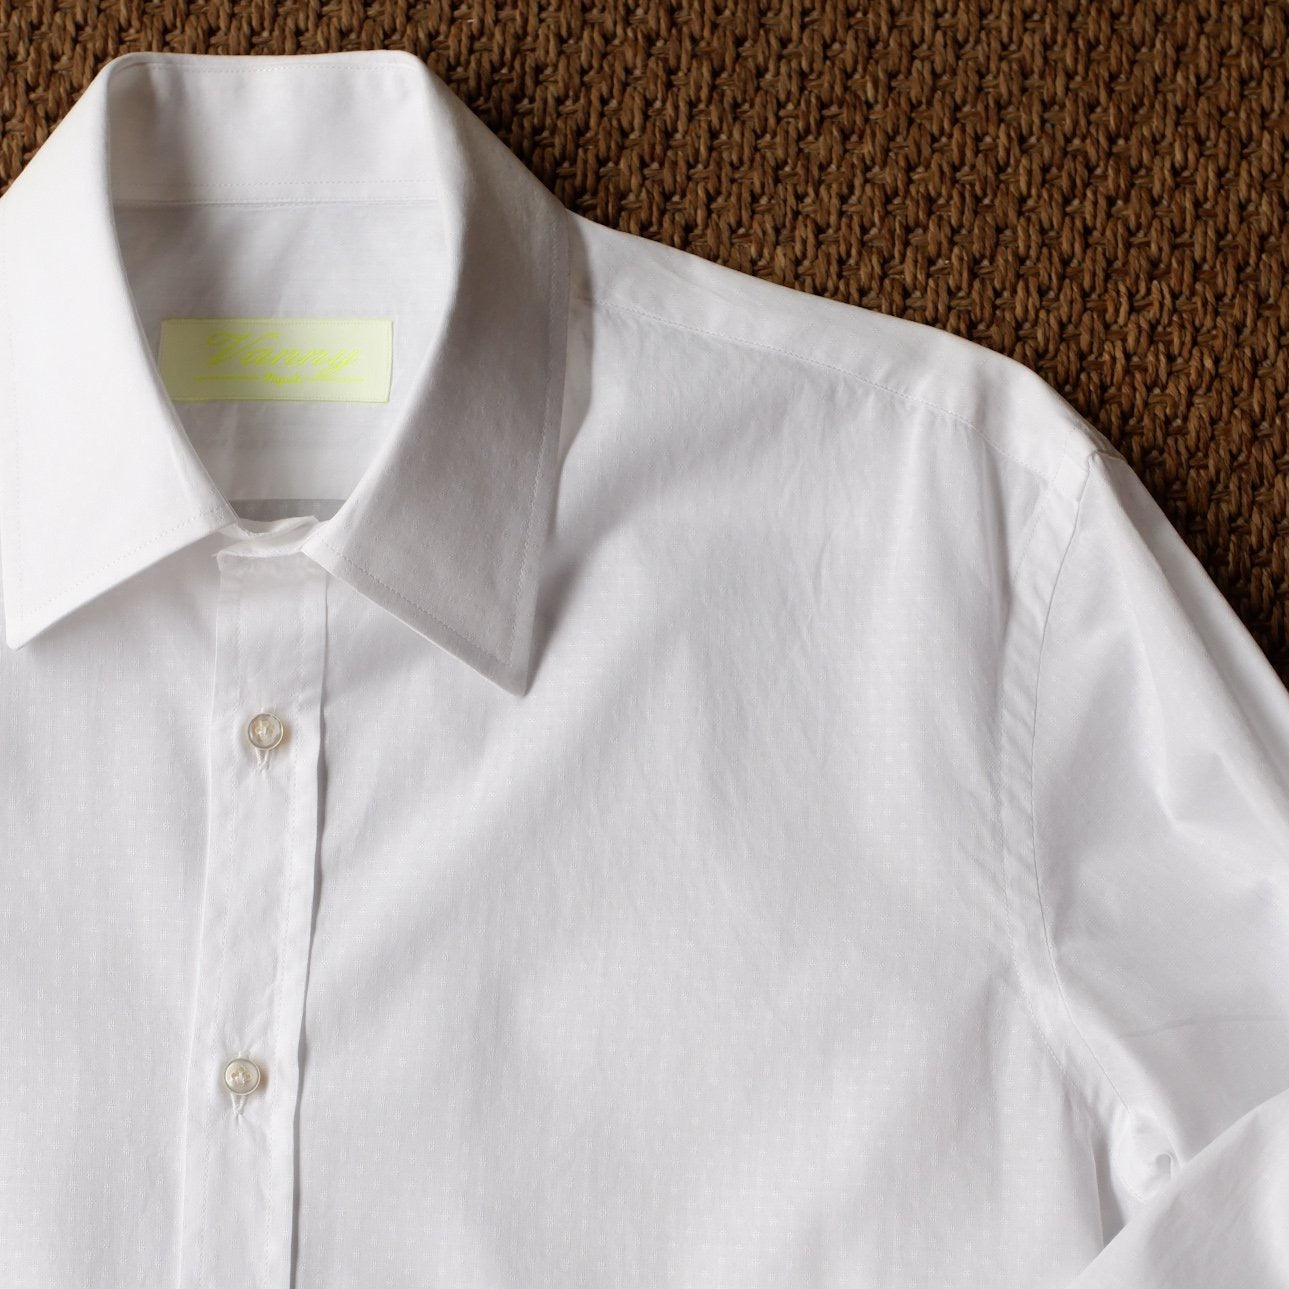 Vanny Napoli White Dotted Spread Collar Shirt with French Cuffs